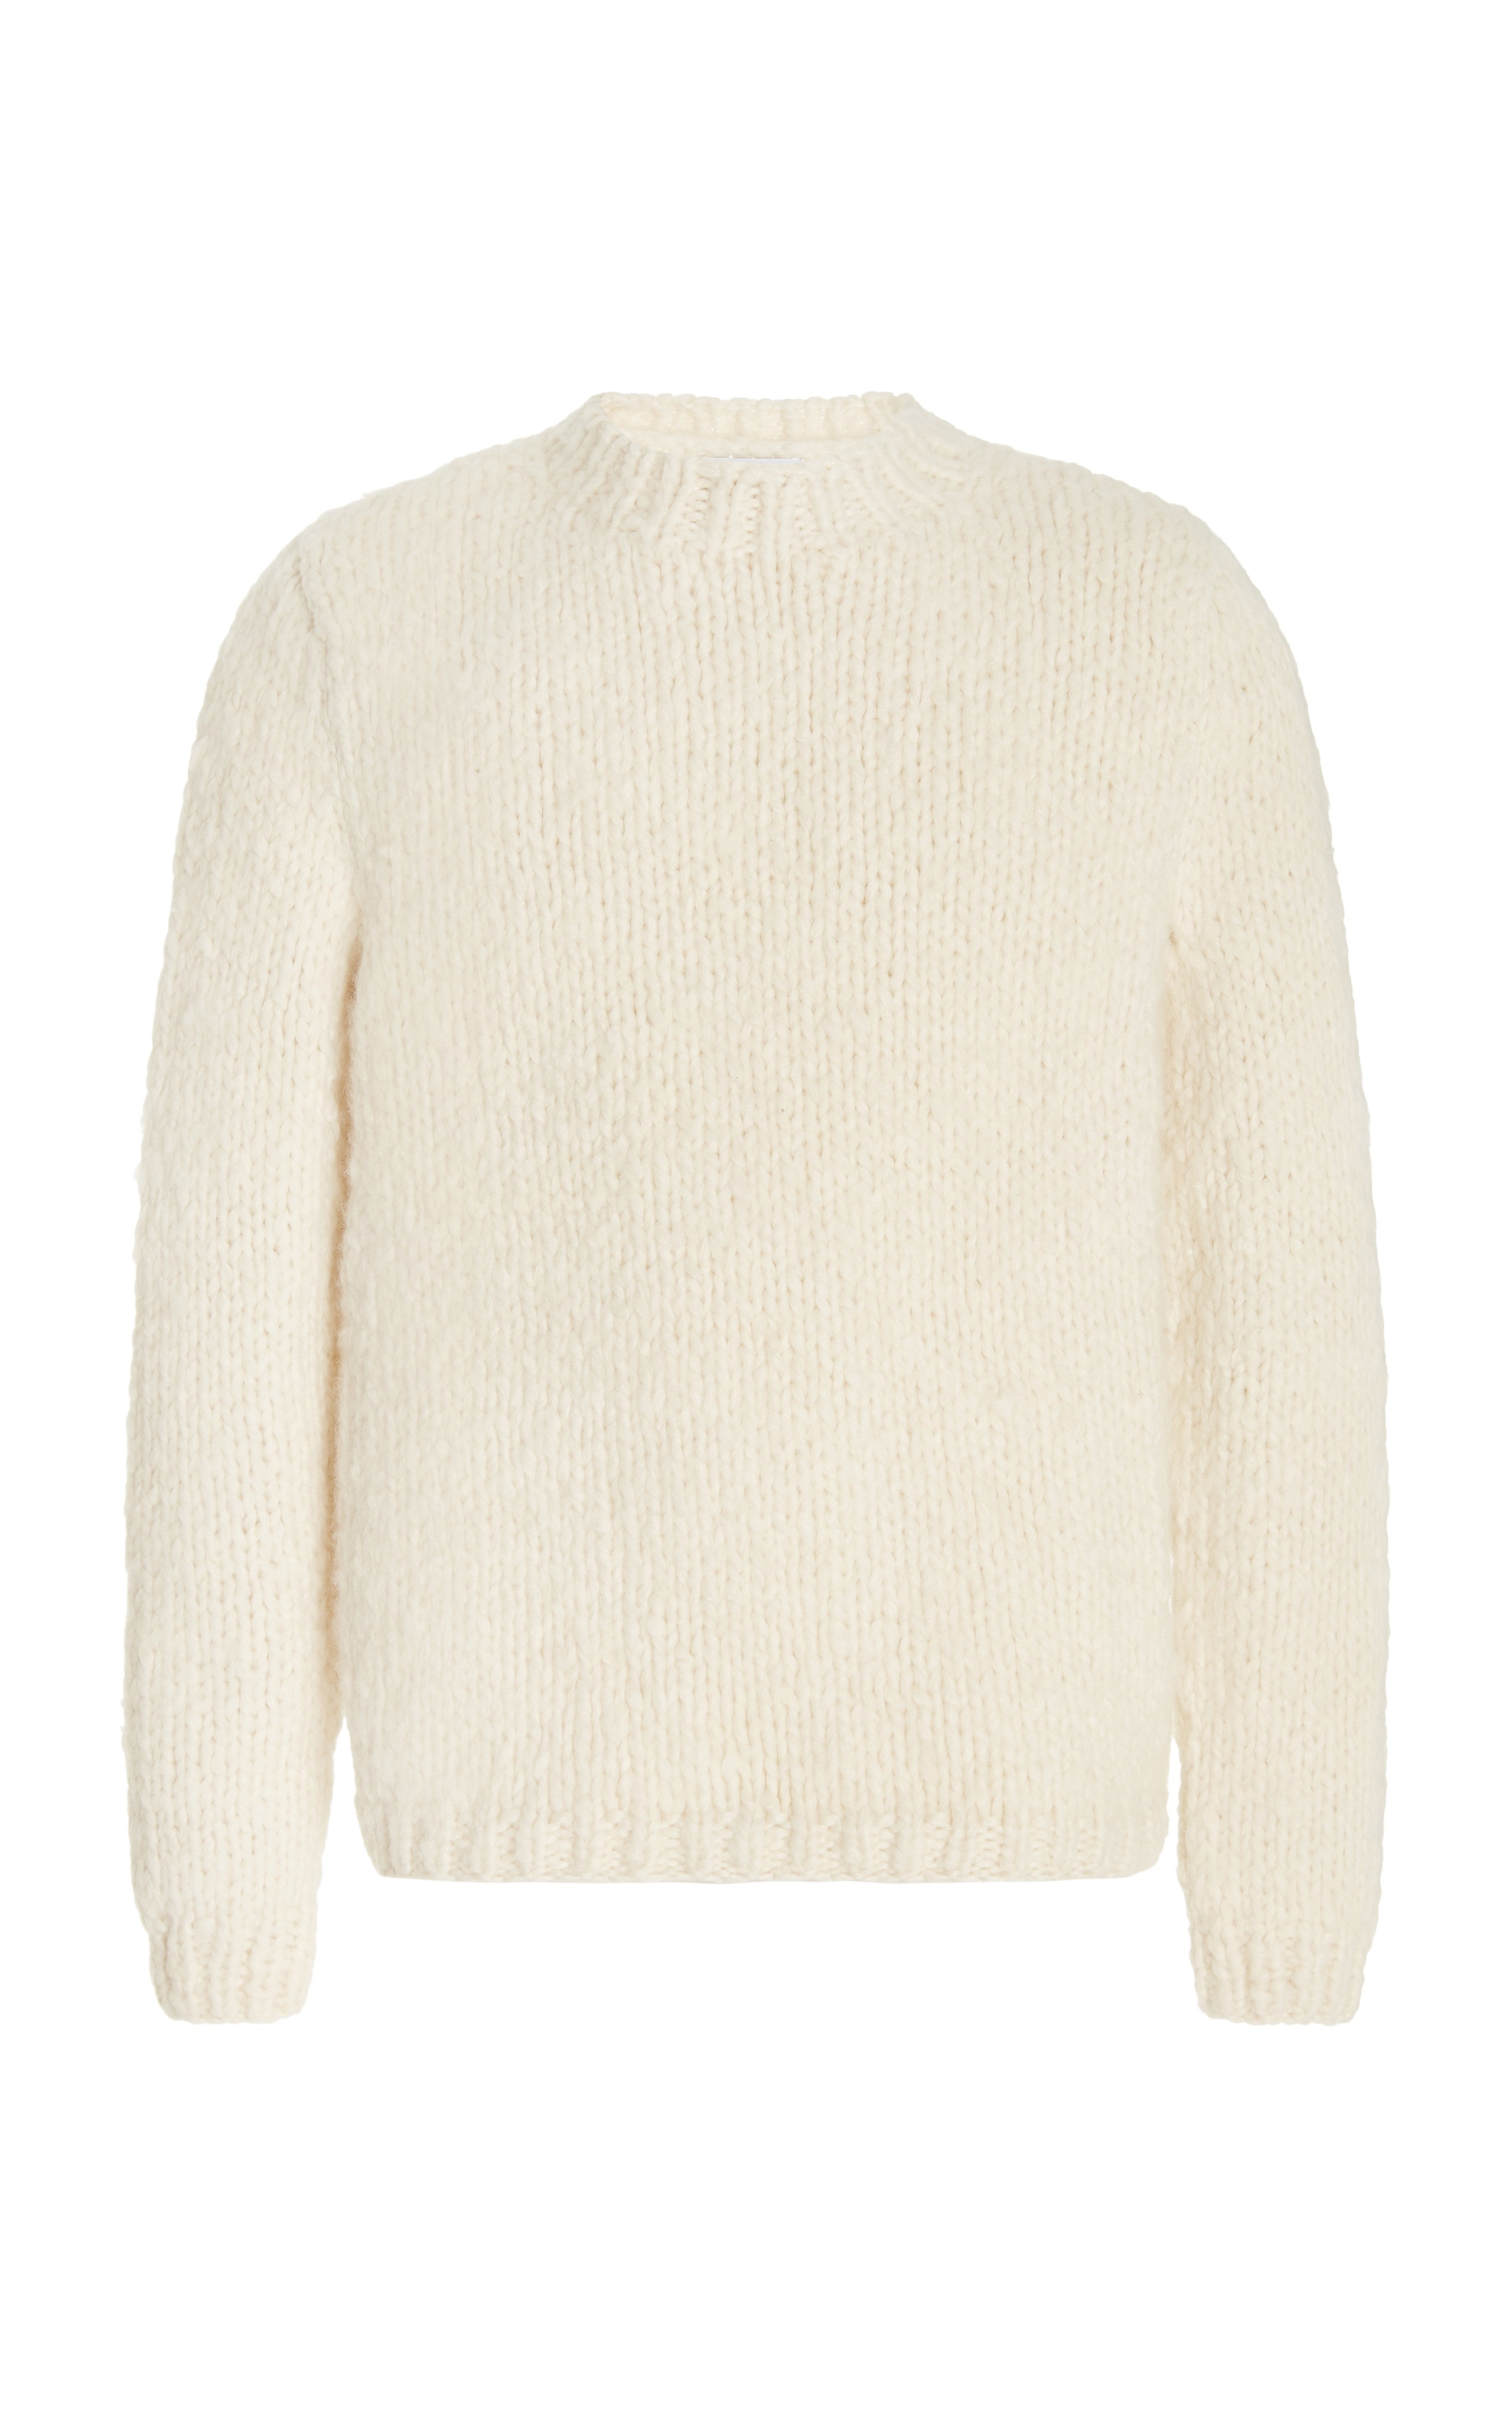 Lawrence Knit Sweater in Ivory Welfat Cashmere - 1